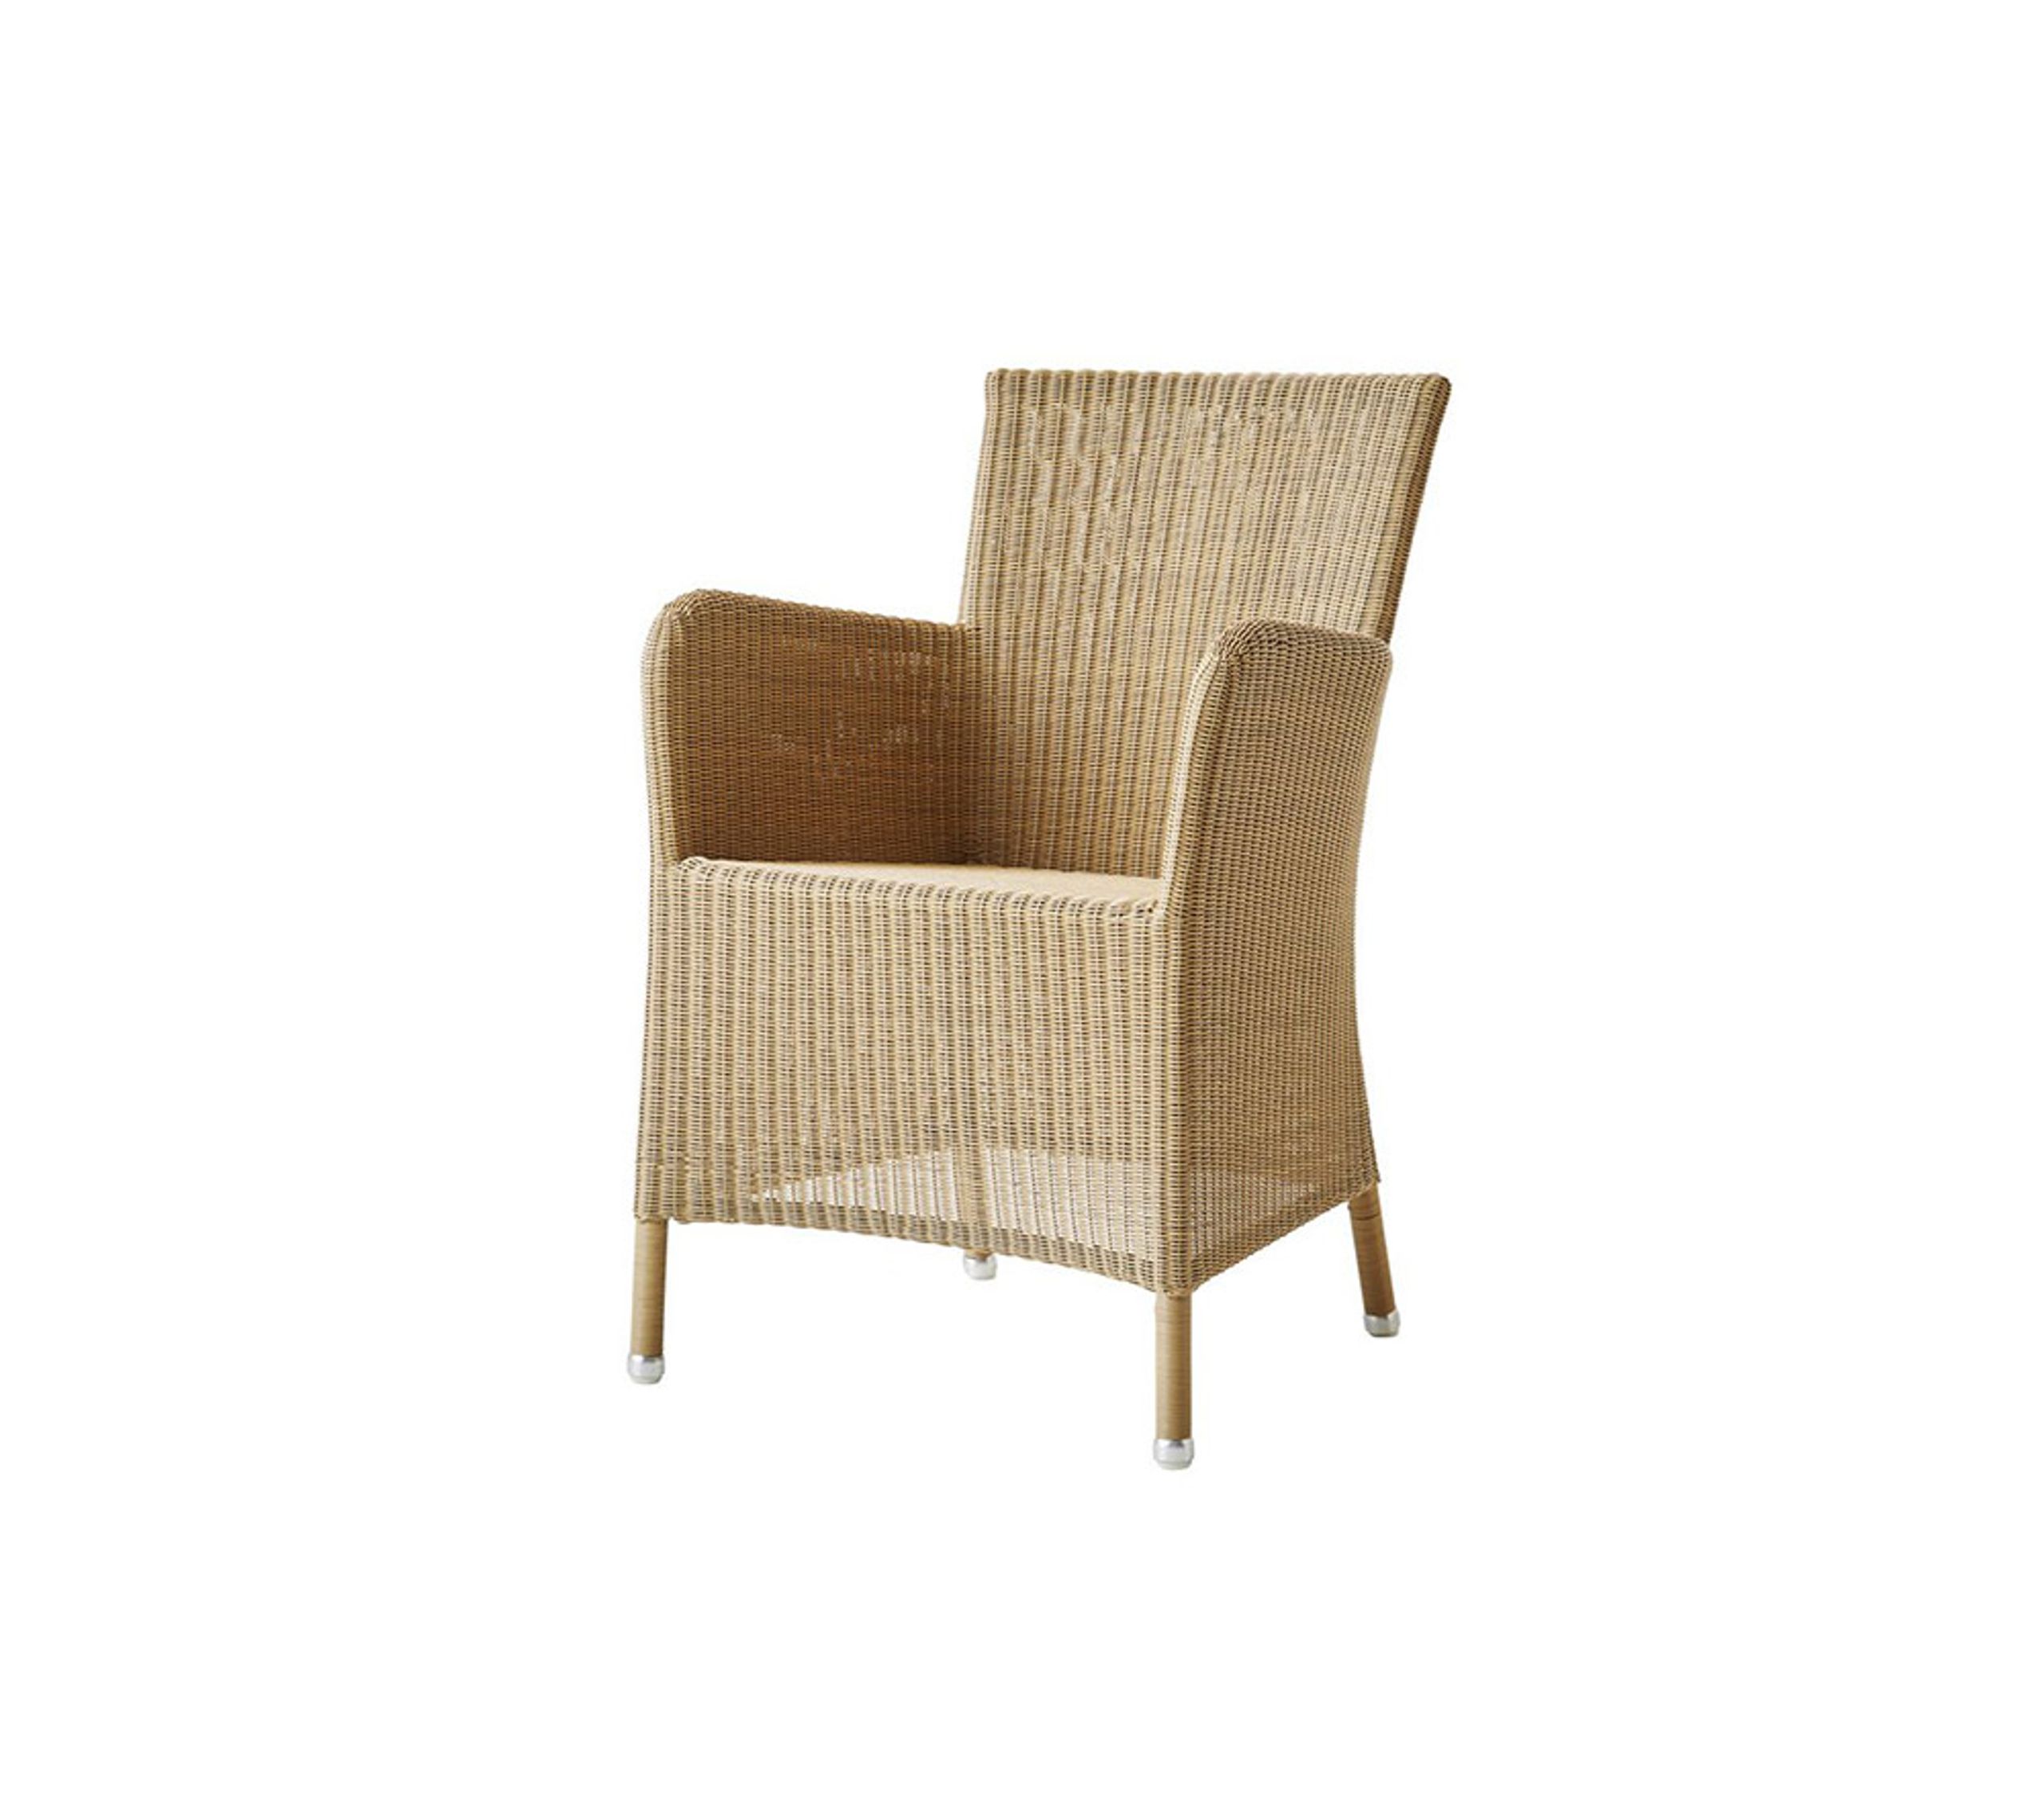 Cane-line - Stoel - Hampsted Chair - Natural Cane-line Weave